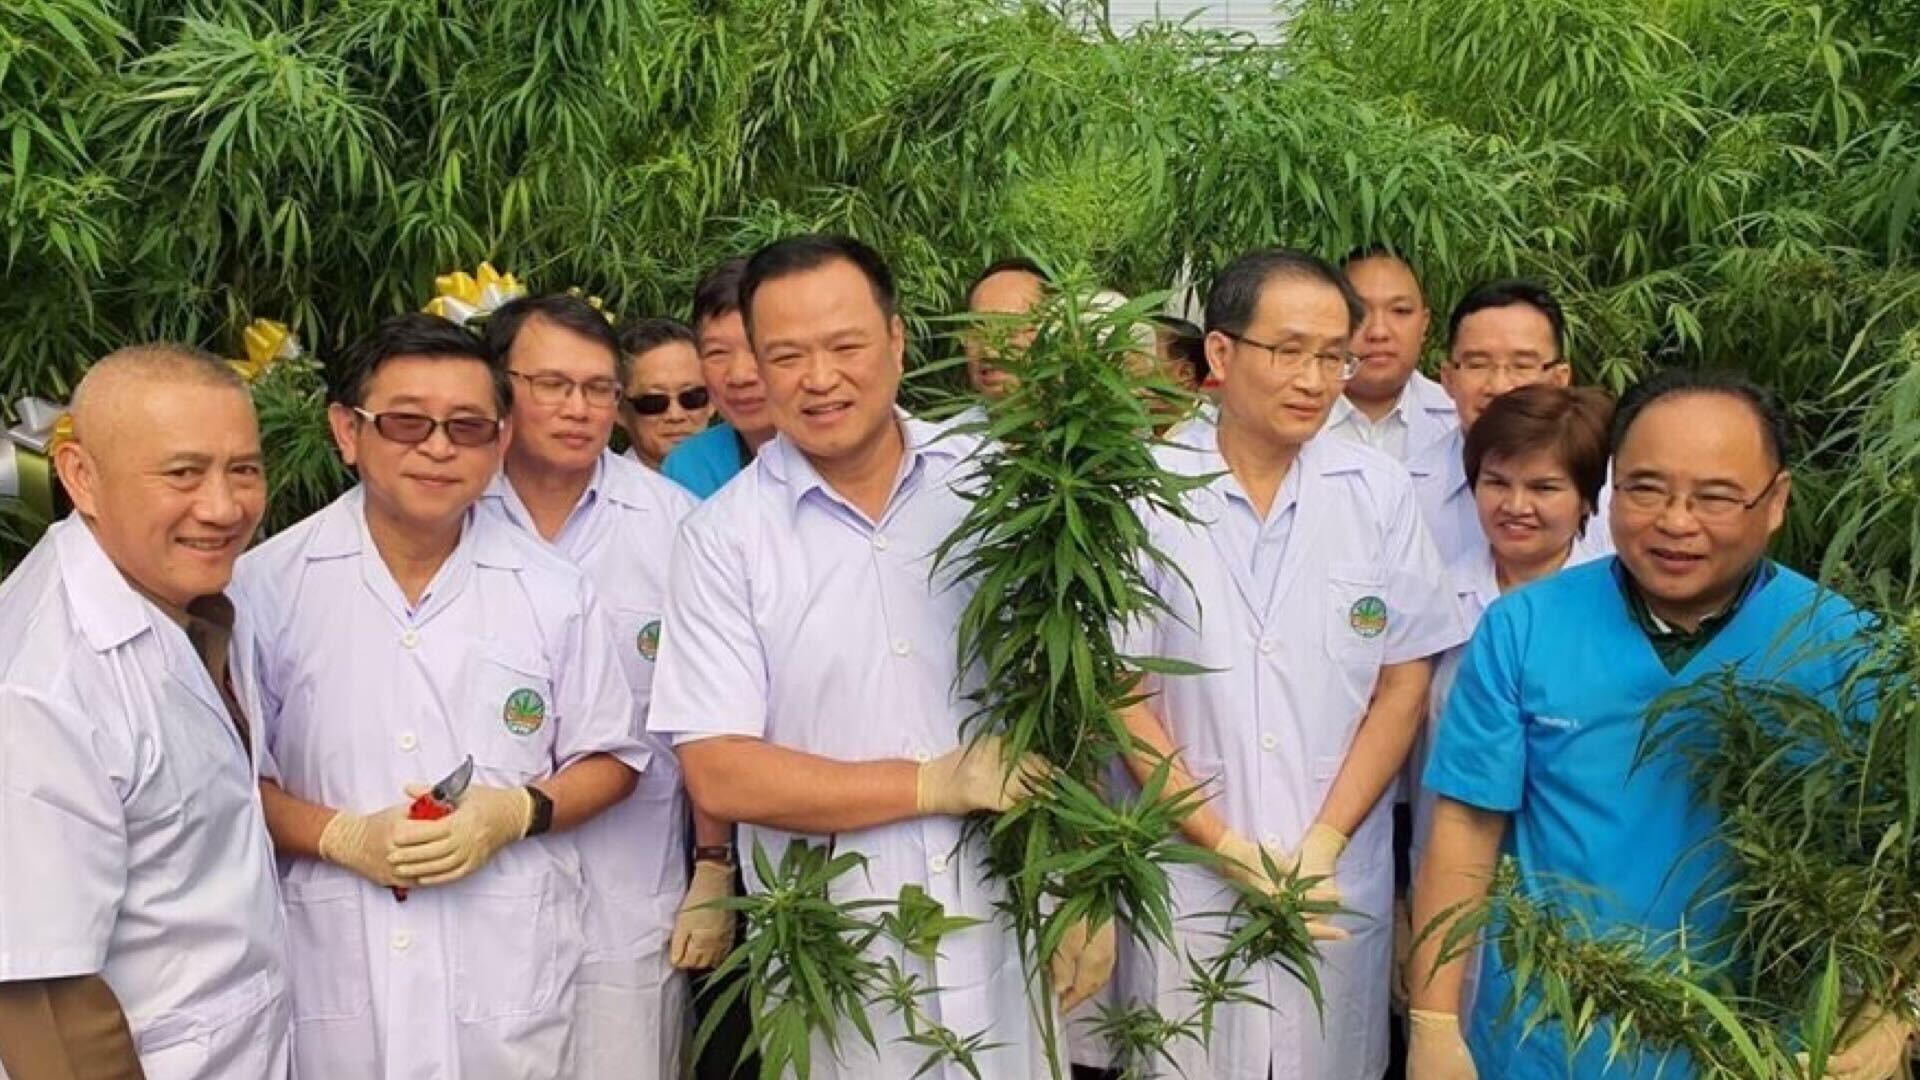 Thailand is giving away 1 million cannabis plants to celebrate new homegrow laws